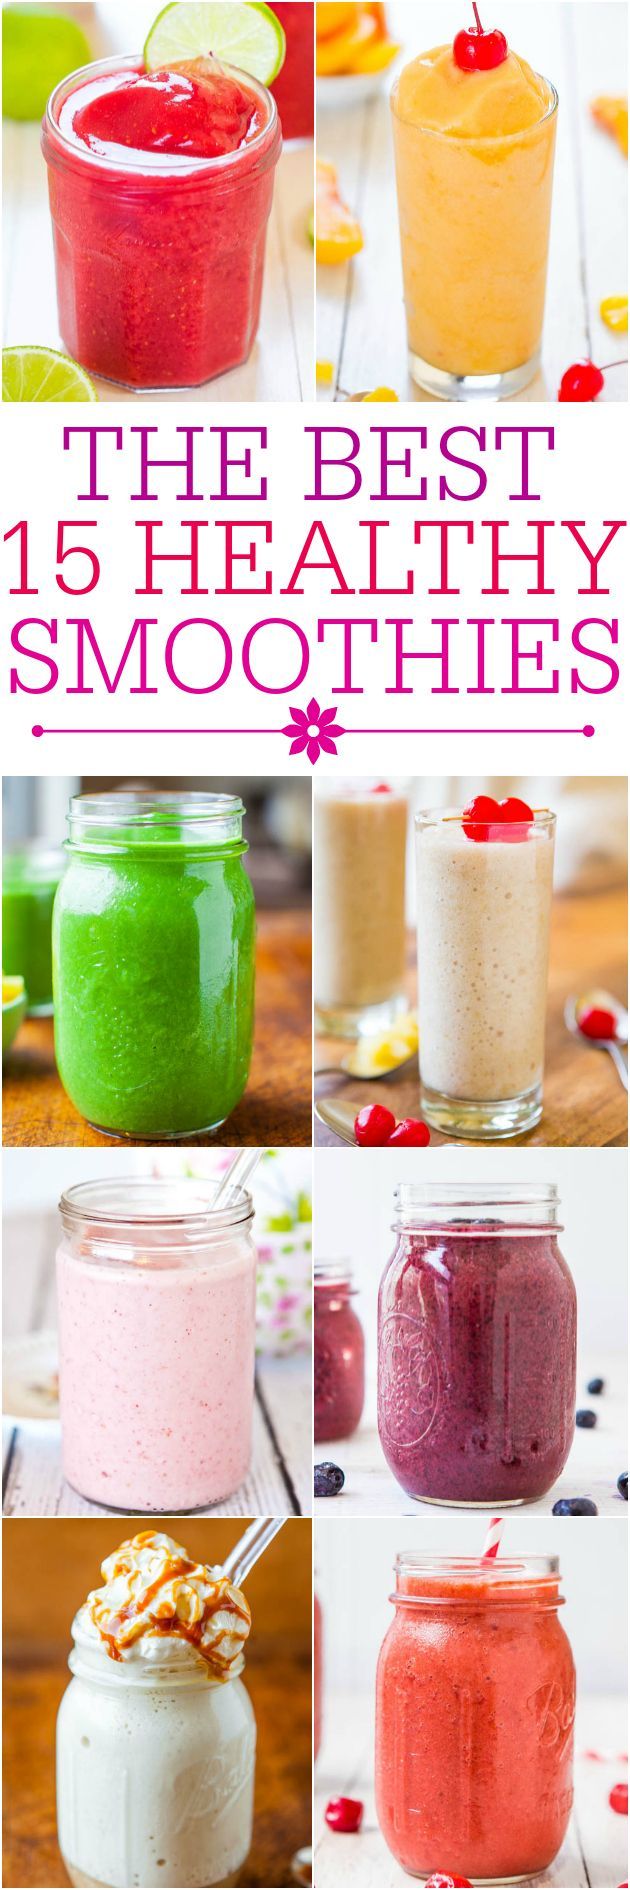 The Best 15 Healthy Smoothi